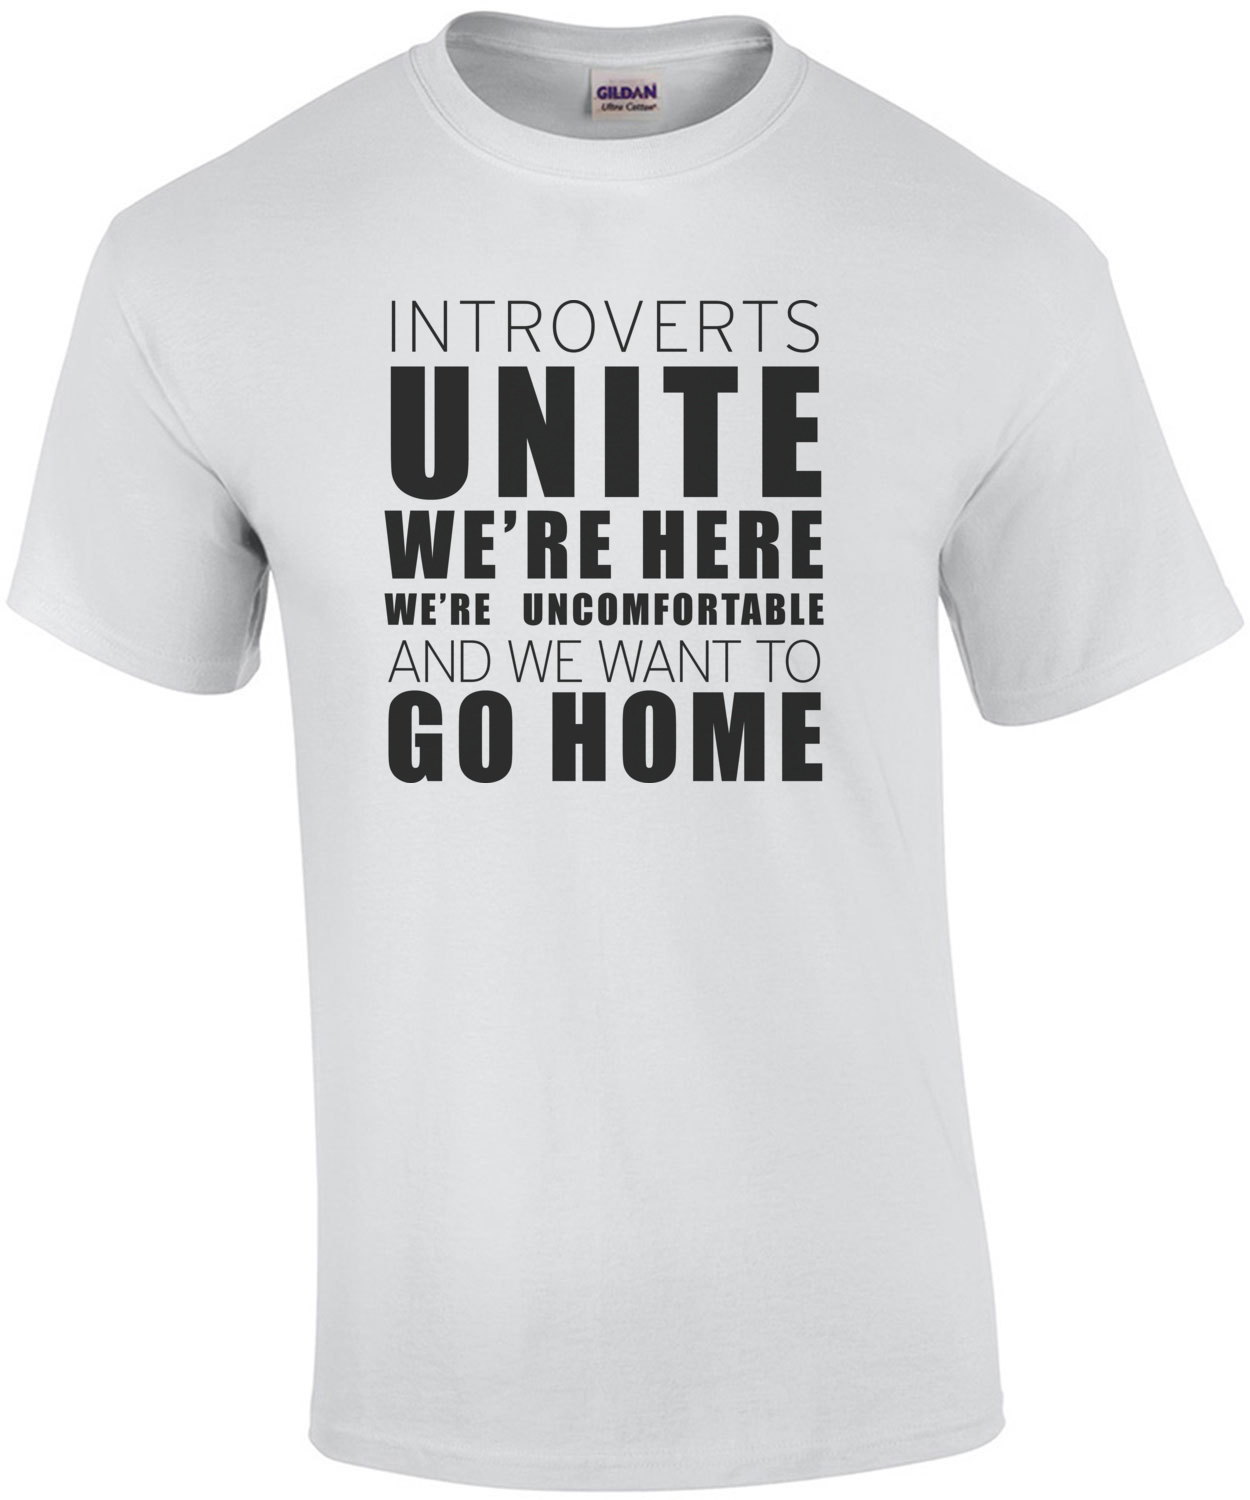 Introverts Unite We're Here We're Uncomfortable and we want to go home - funny introvert t-shirt